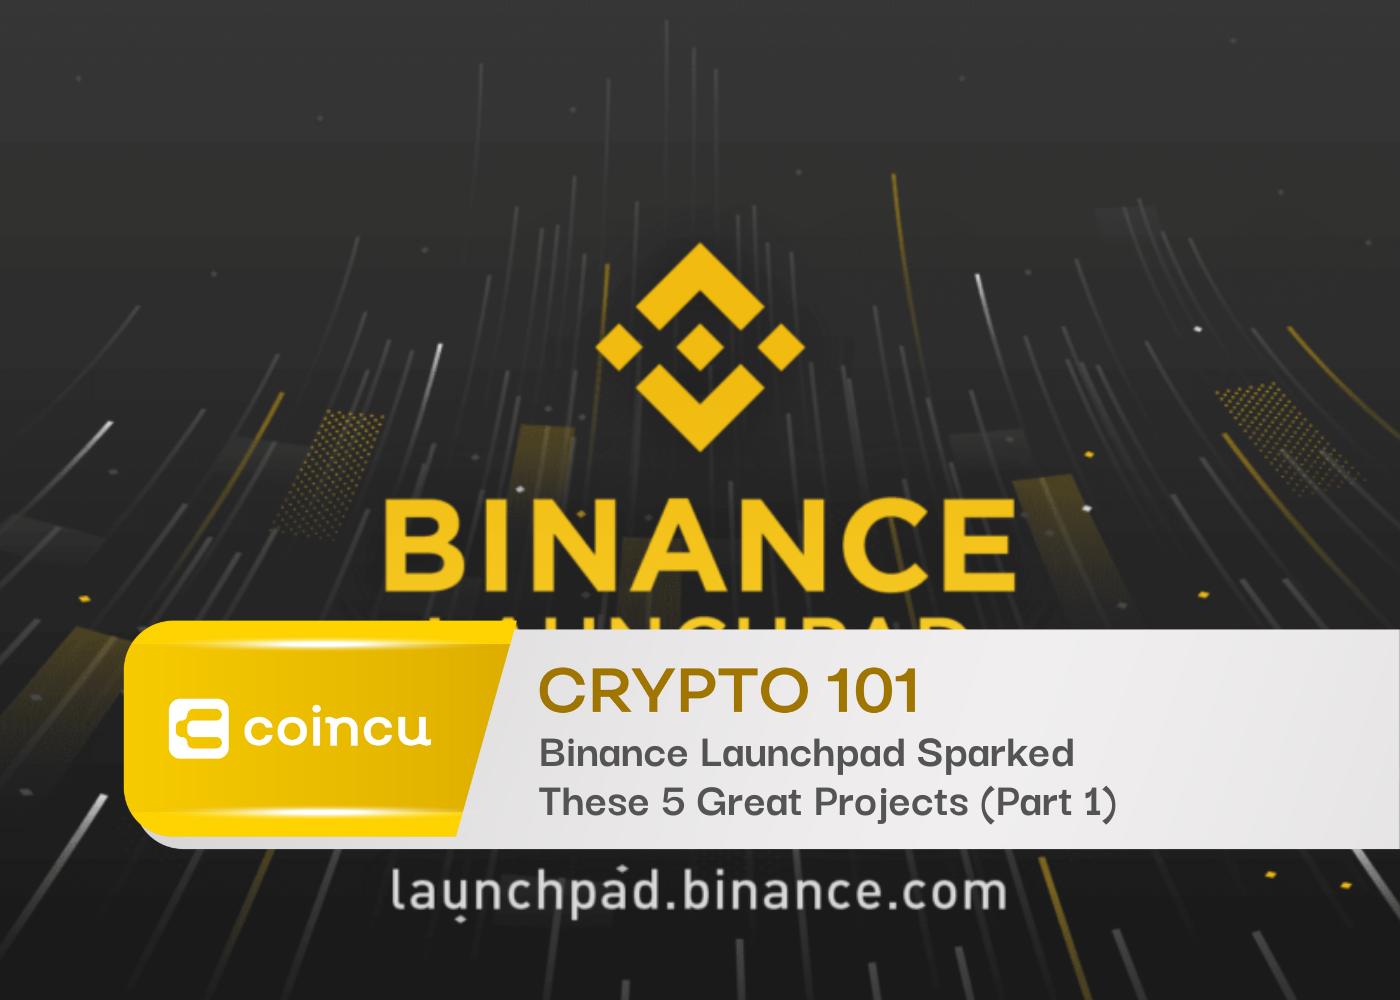 Binance Launchpad Sparked These 5 Great Projects